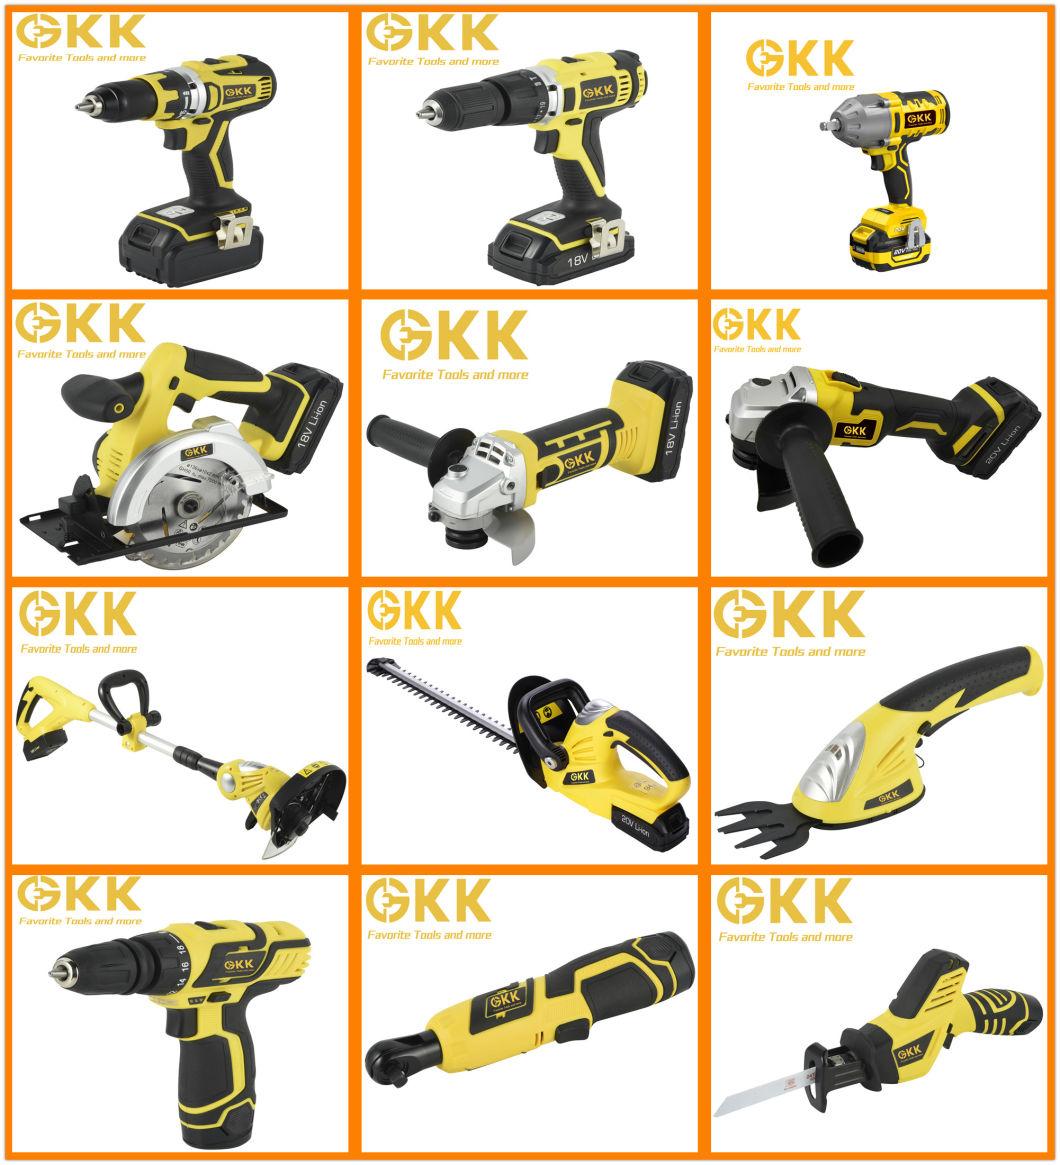 China Factory High Quality Construction Tools 12V 1300mAh Lithium Battery Two Speed Cordless Drill Set Electric Tool Power Tool